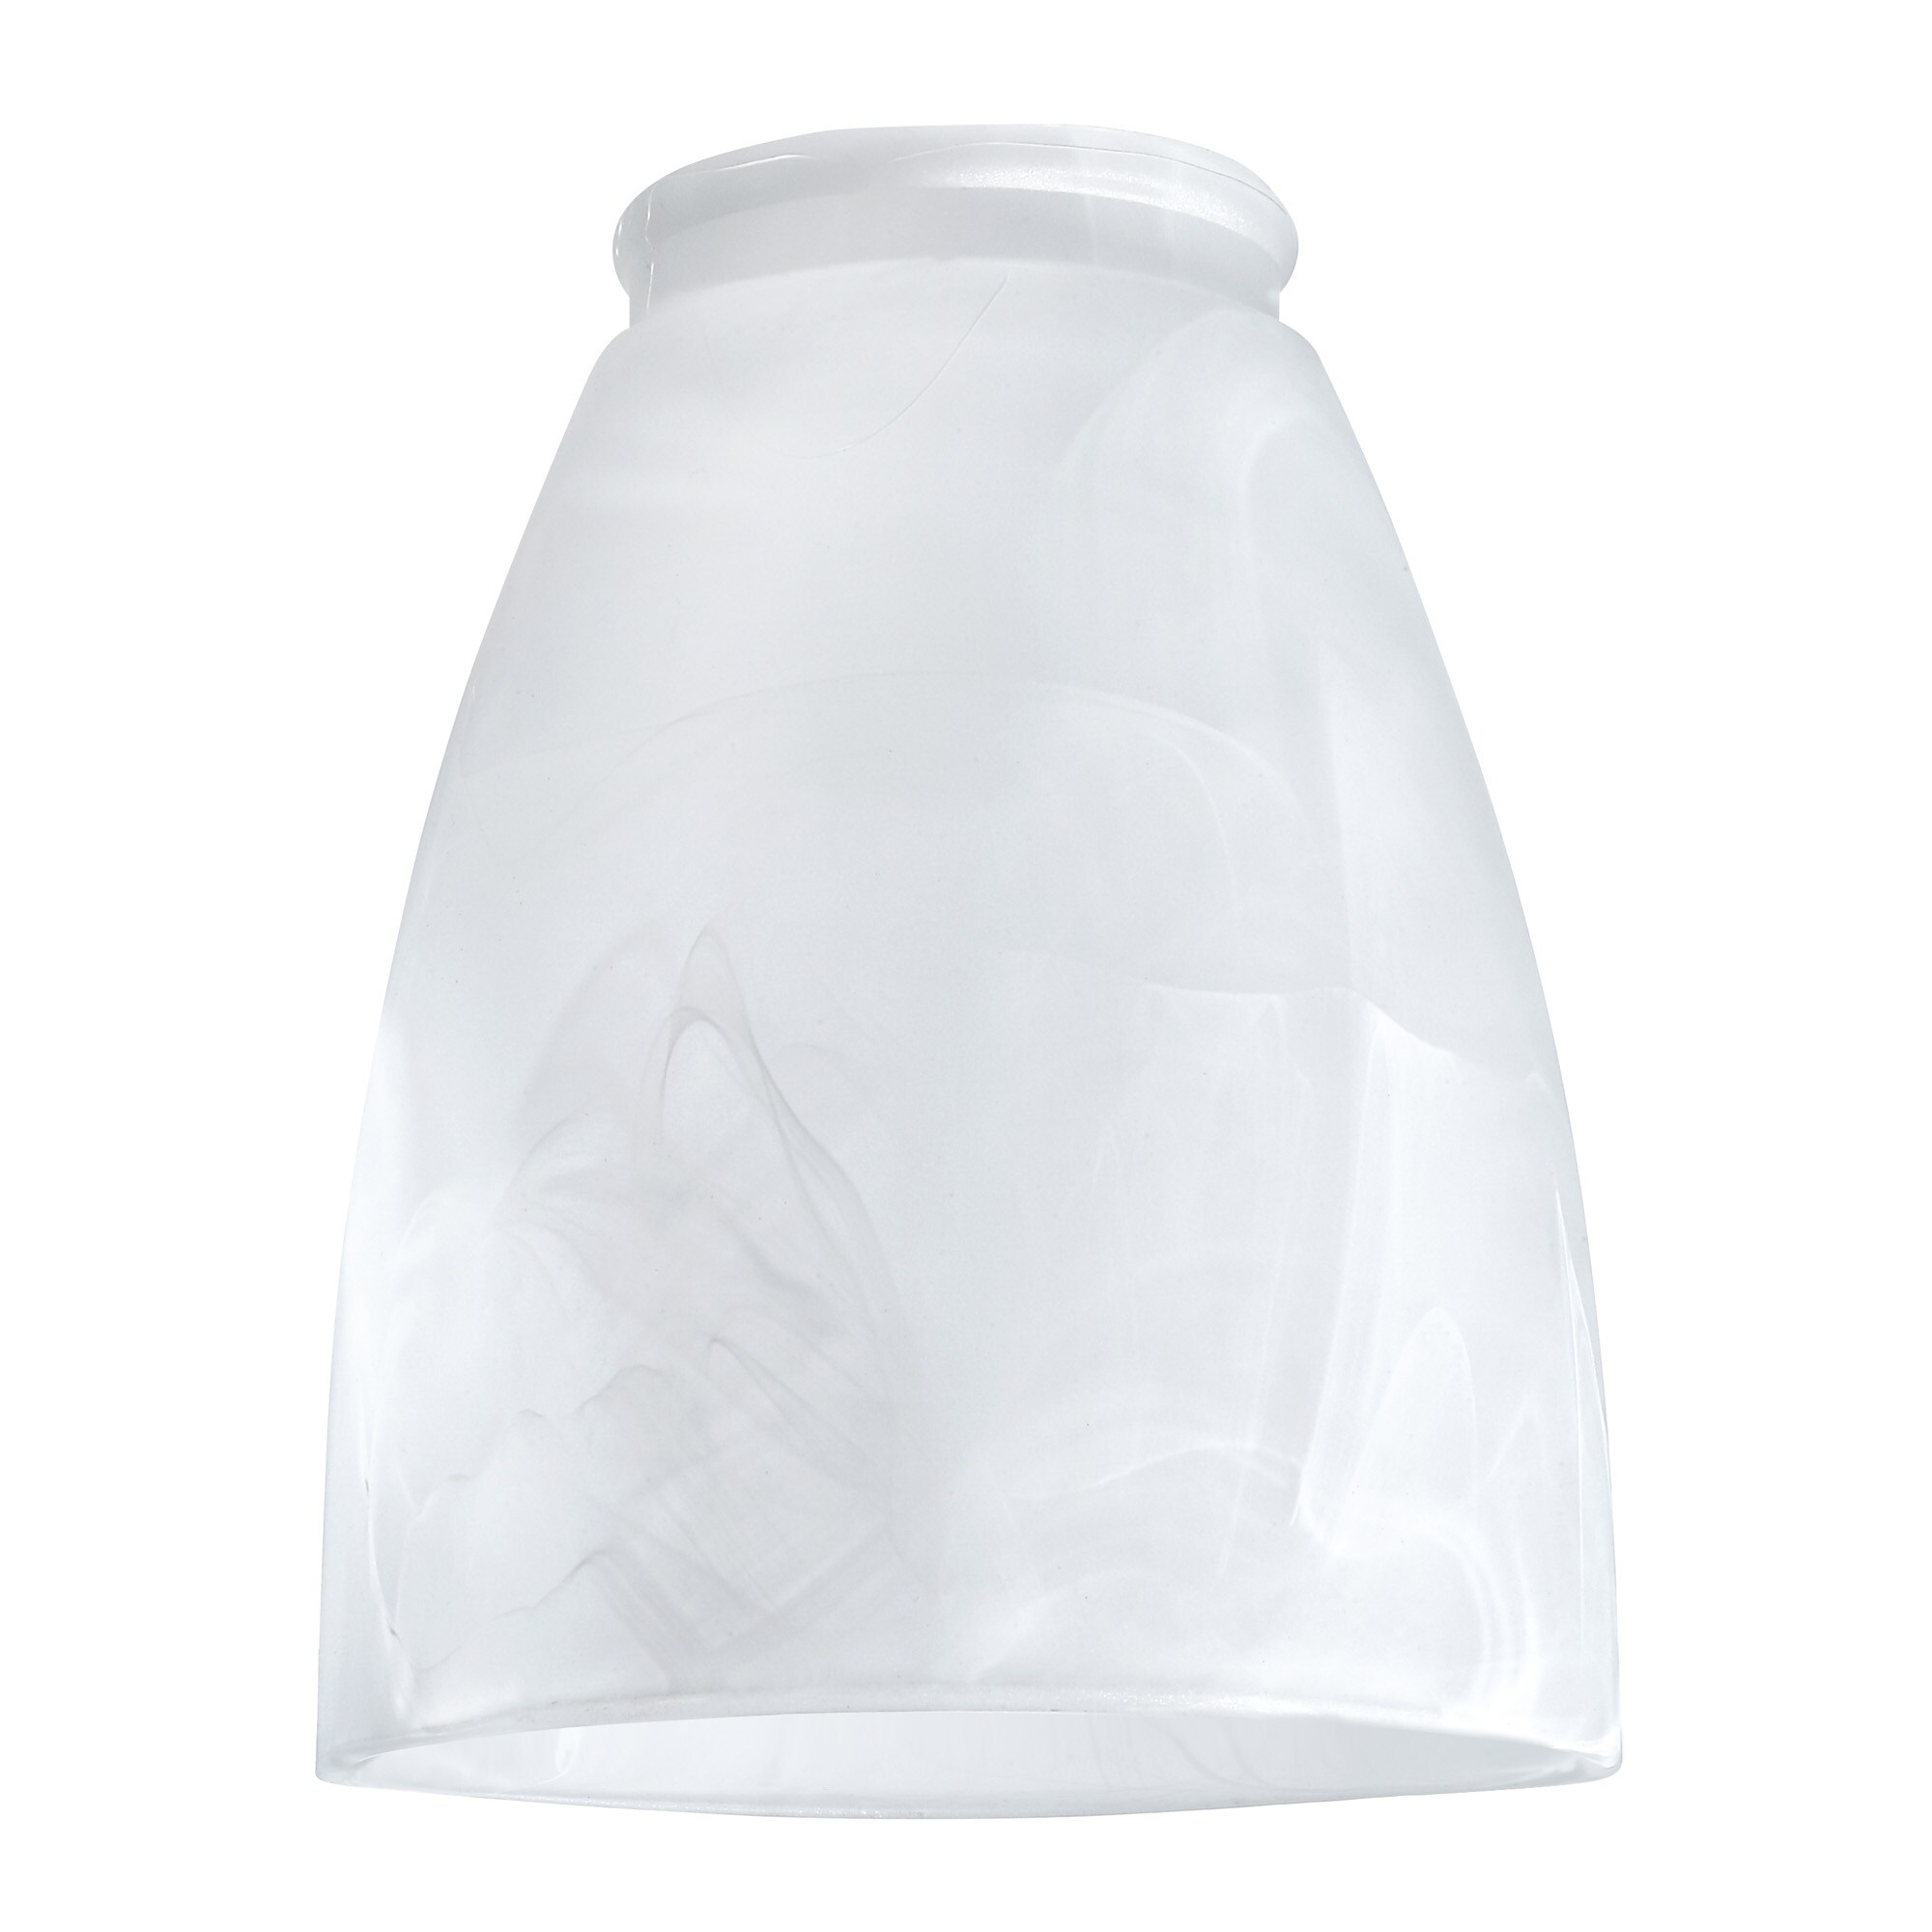 NWOB Heavy White Alabaster Glass Replacement Light Shade 